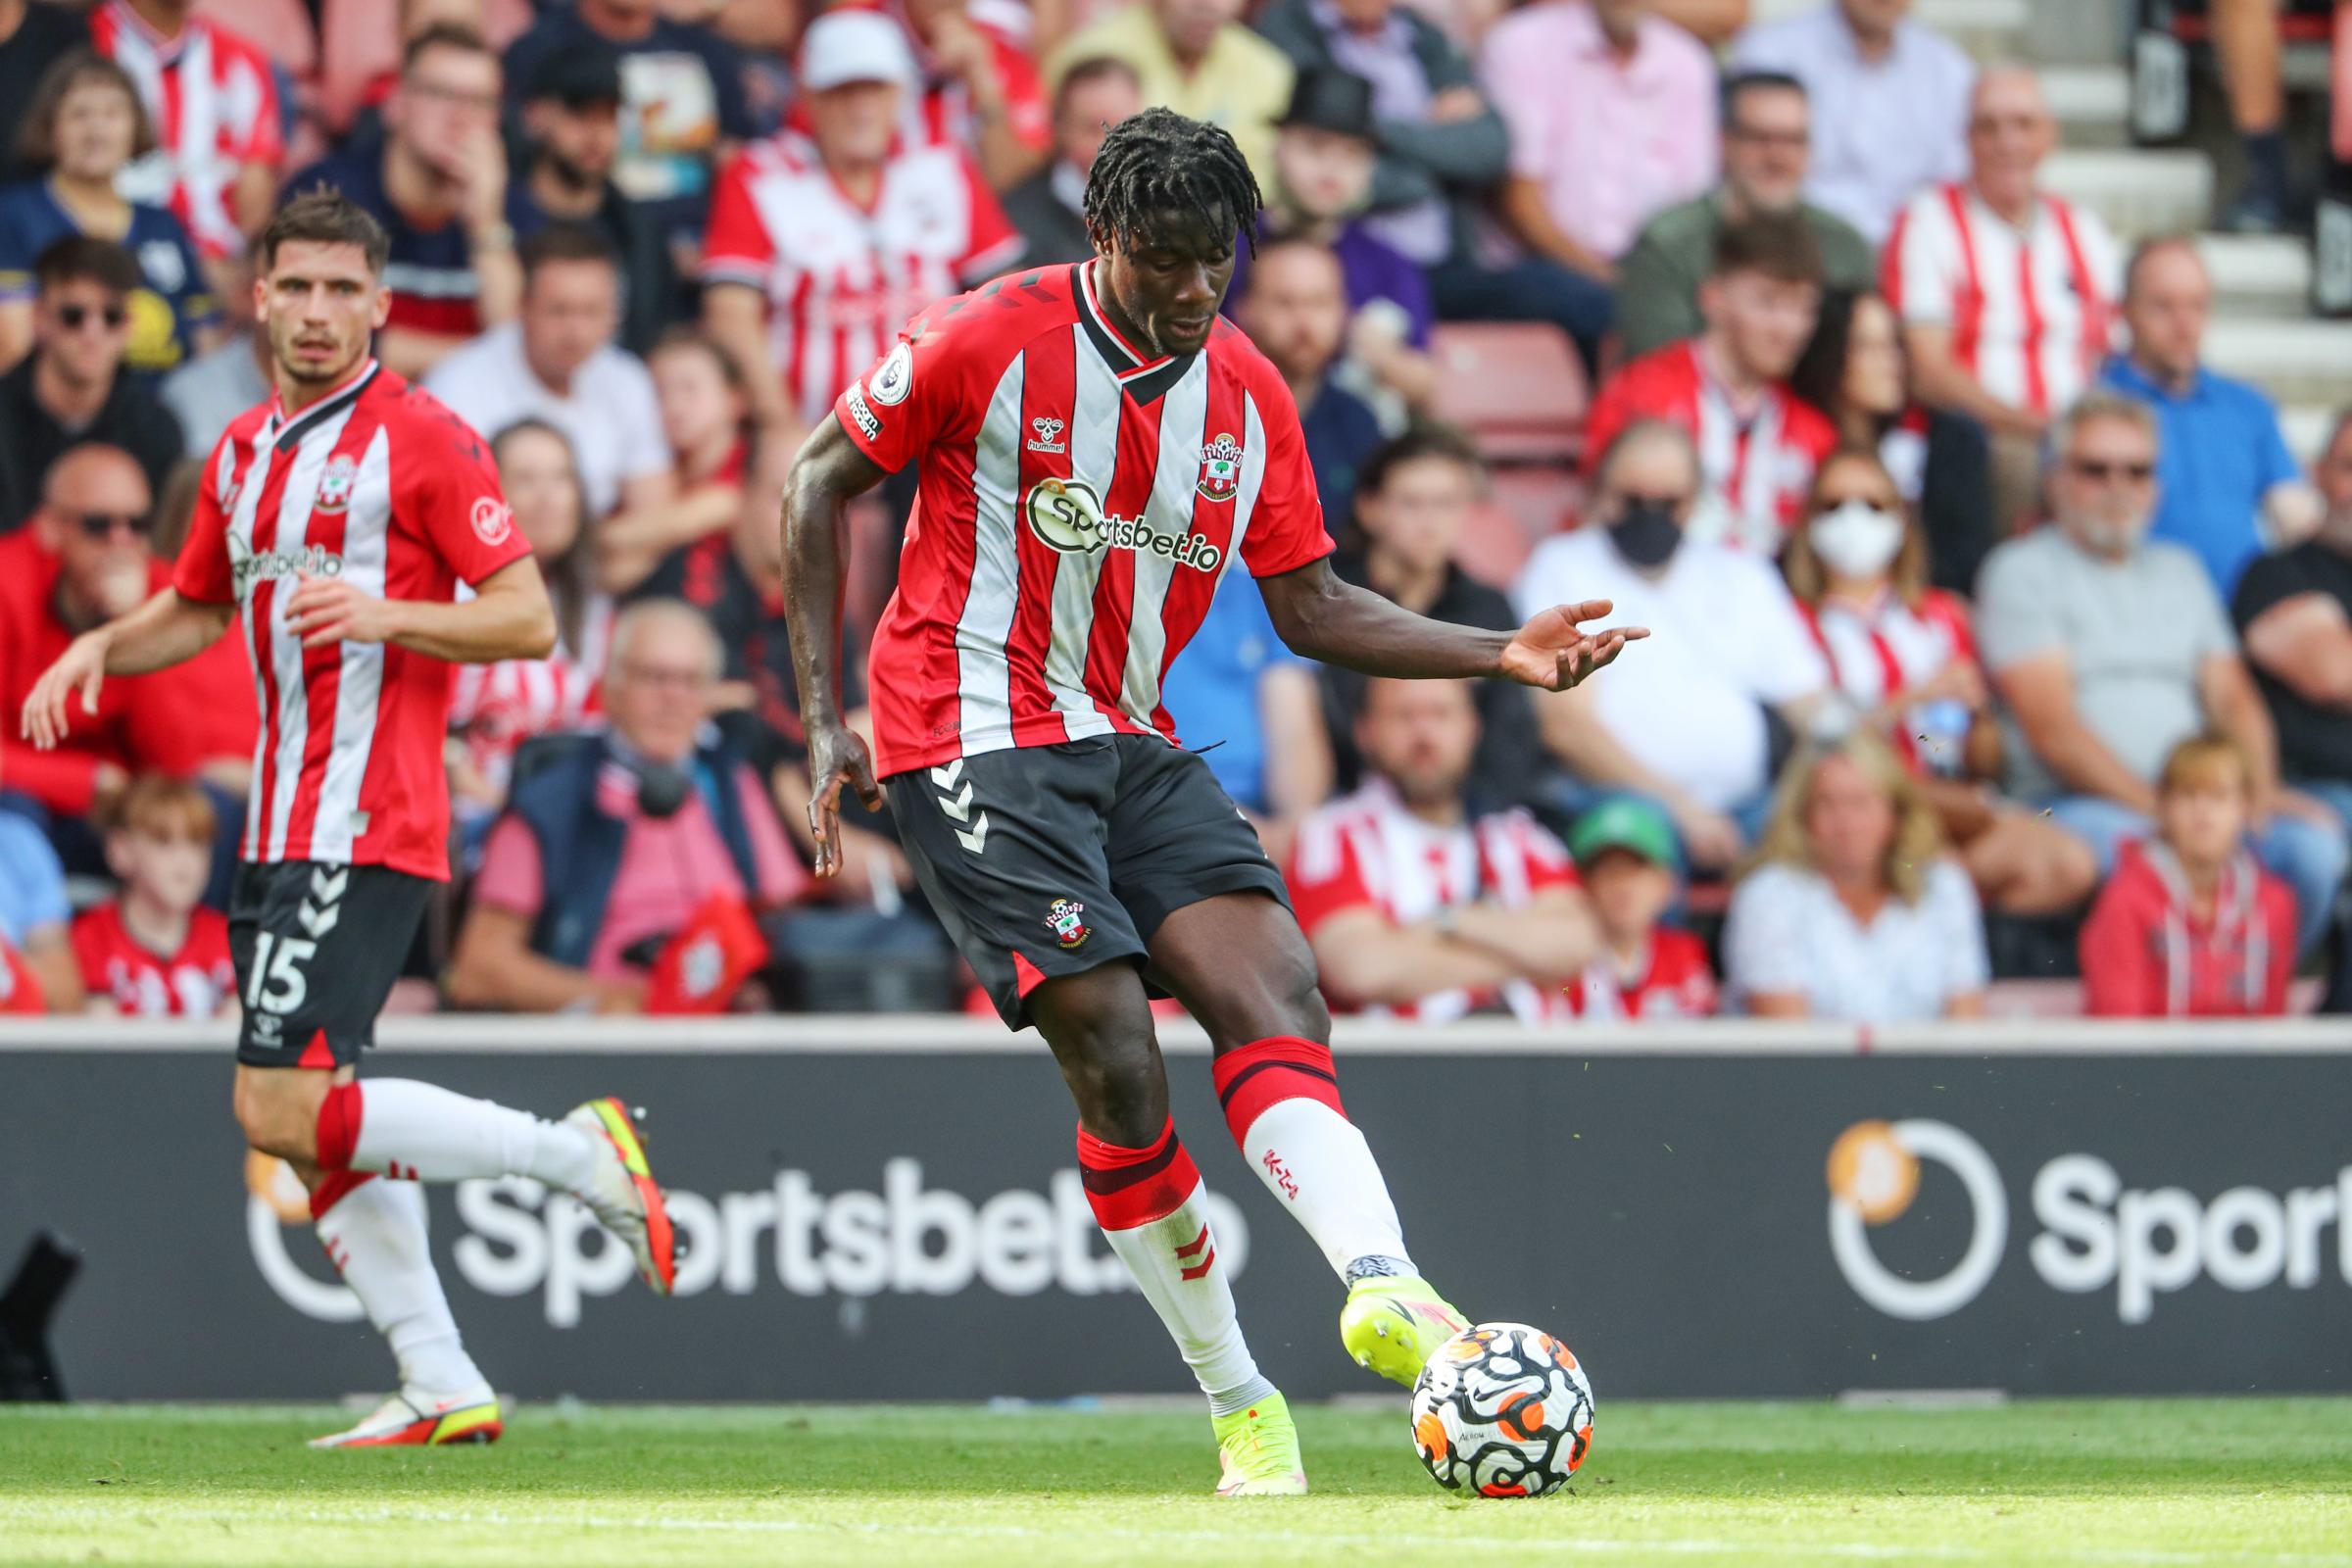 Mohammed Salisu, Southampton defender, has turned down a chance to play for Ghana at the international level